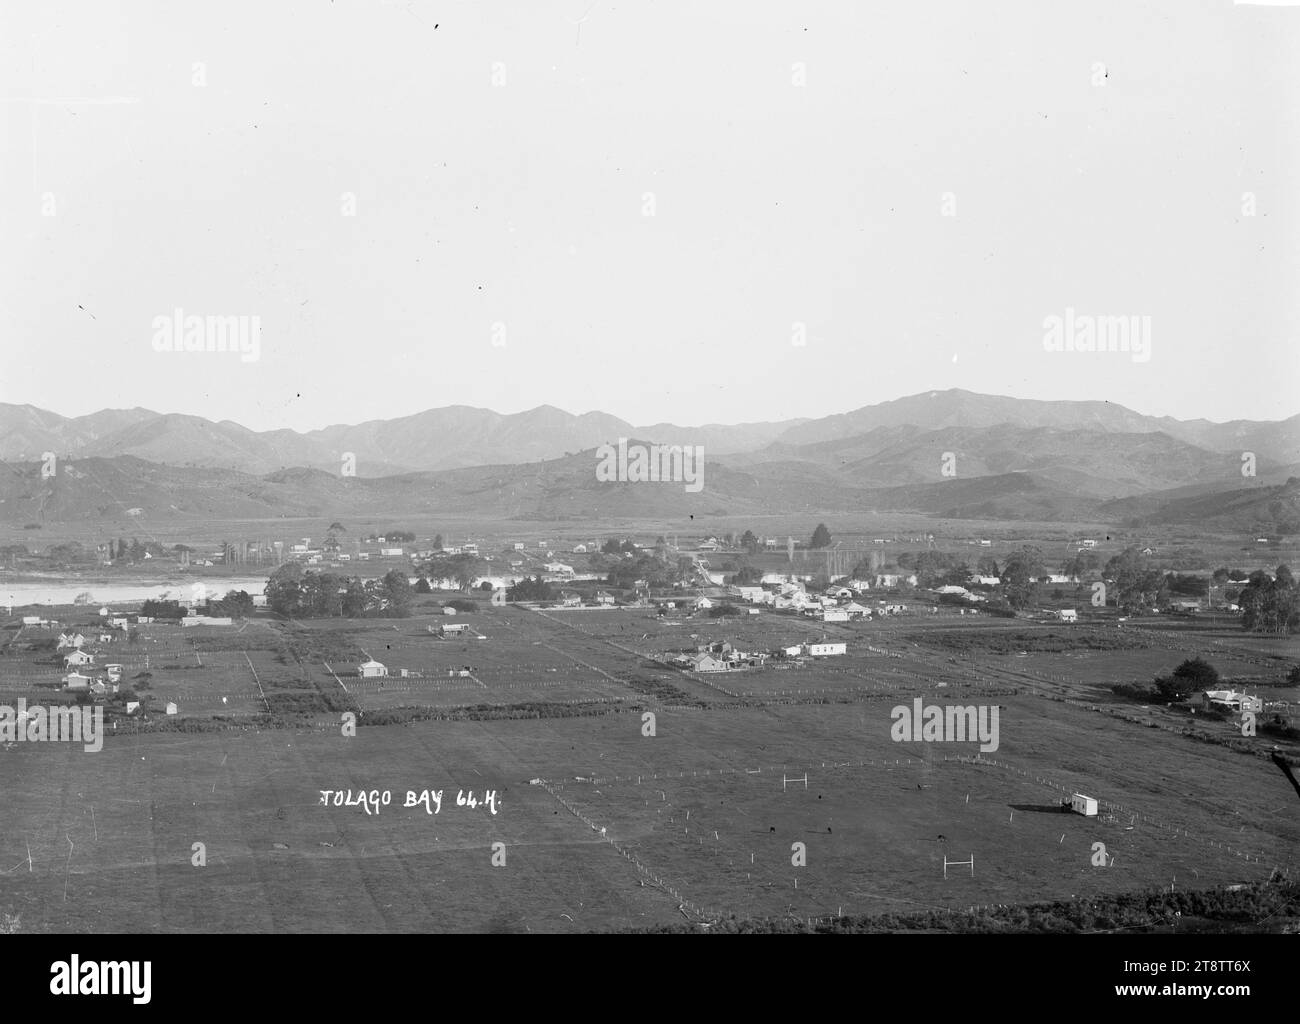 Distant view of Tolaga Bay, Gisborne, Distant view of Tolaga Bay, Gisborne. Shows the town beside the river, with farm houses and paddocks in the foreground (including one used as a rugby field). A mountain range can be seen in the distance. Photograph taken between 1906 and 1912 Stock Photo